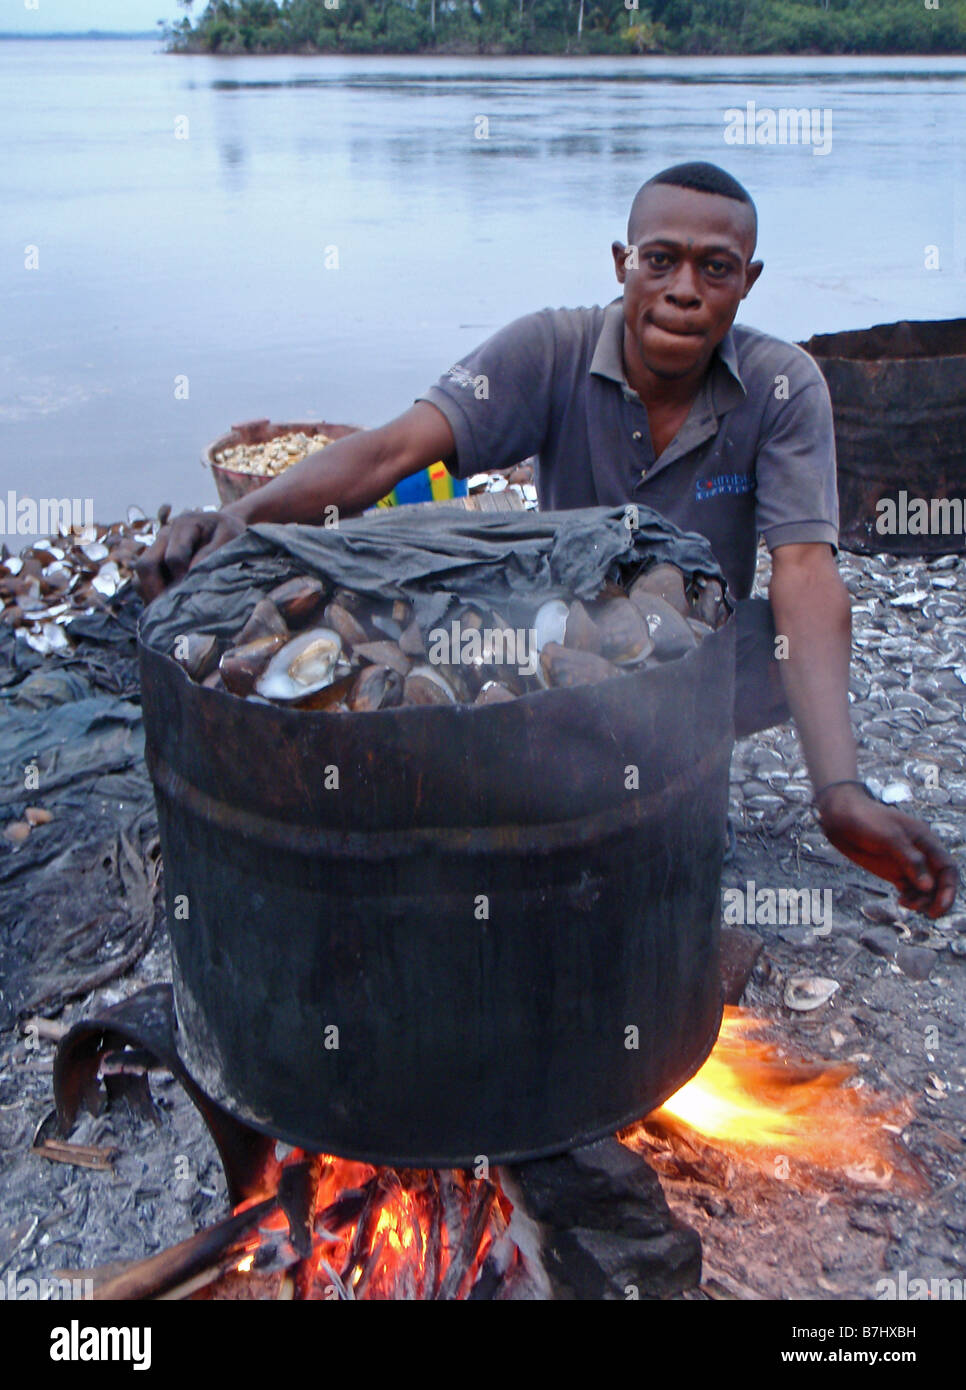 Fisherman boiling clams mussels oysters shell fish in large metal iron drum on banks of River Congo Democratic Republic of Congo Stock Photo